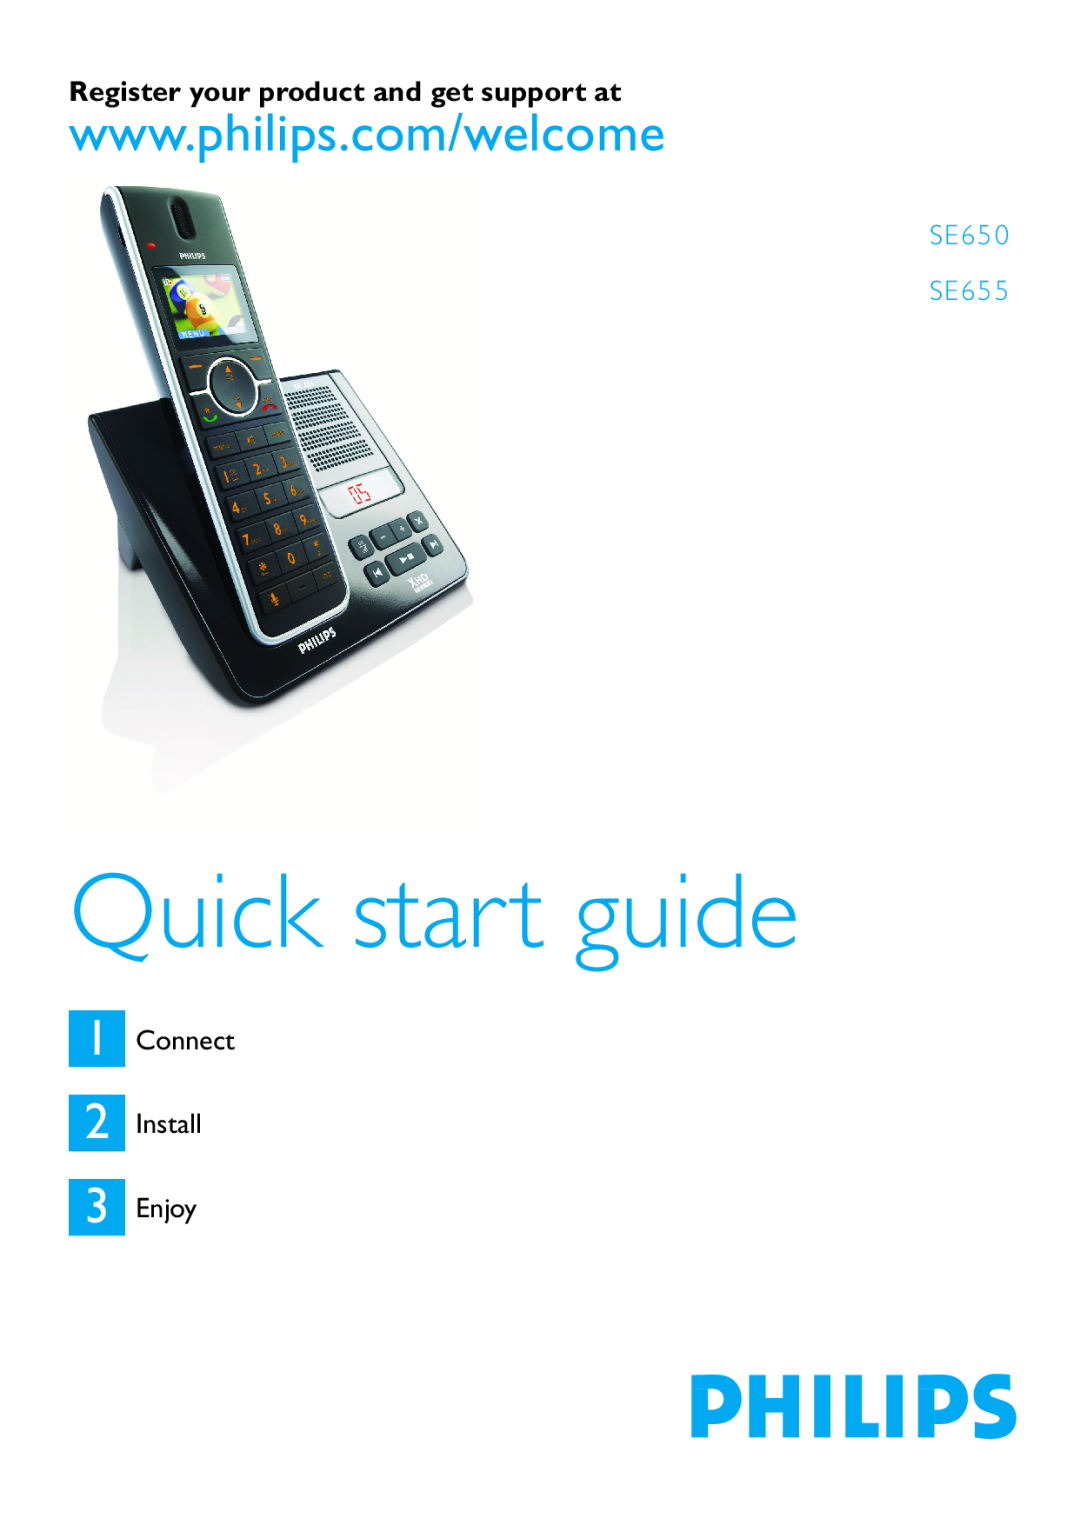 Philips SE655 quick start Quick start guide, Register your product and get support at, SE 65 SE 65, Connect Install, Enjoy 